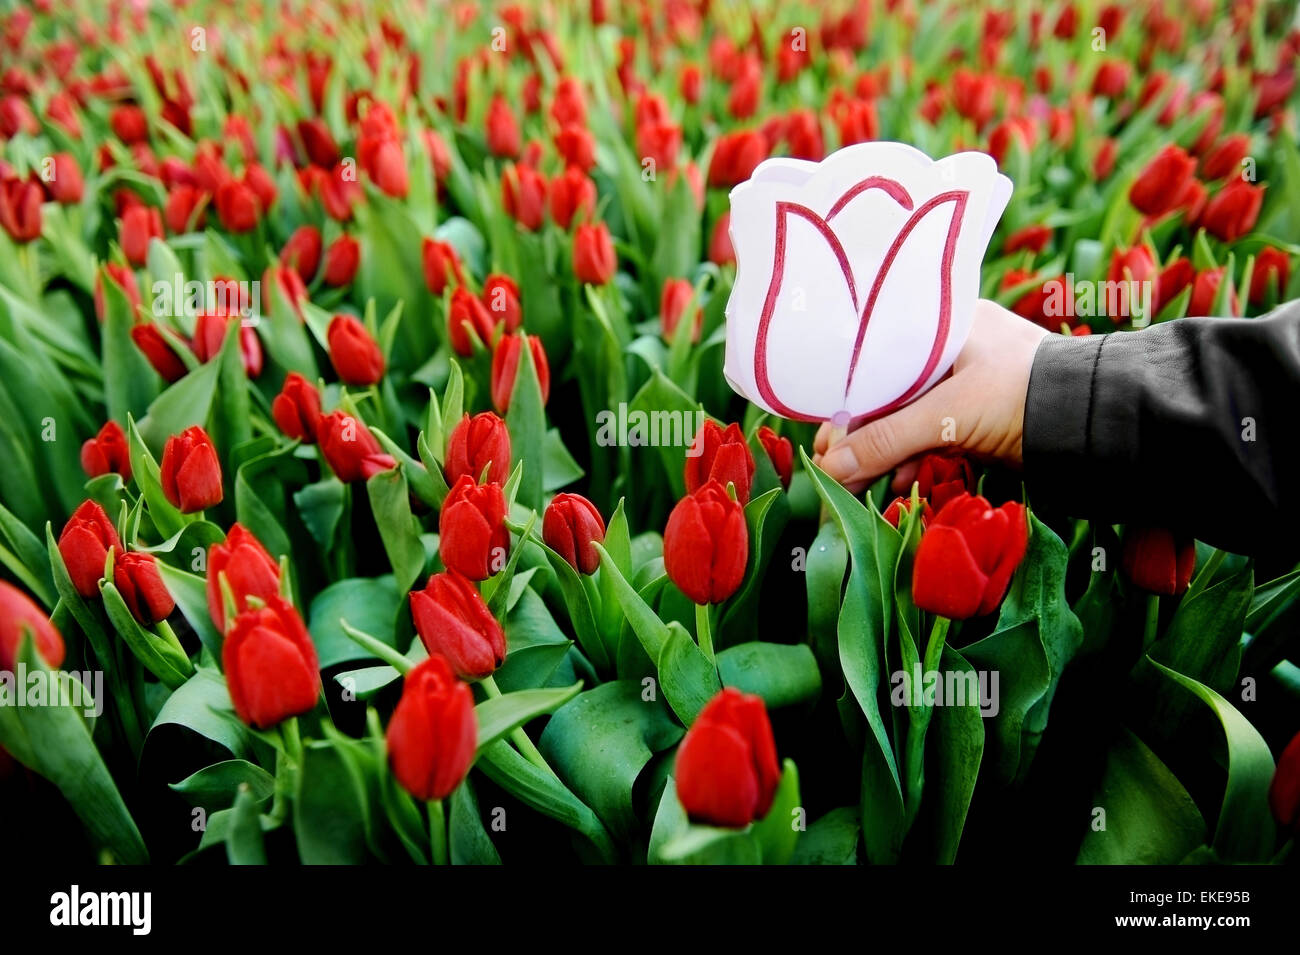 Woman's hand picking up a cardboard tulip from a red tulip field in a greenhouse Stock Photo